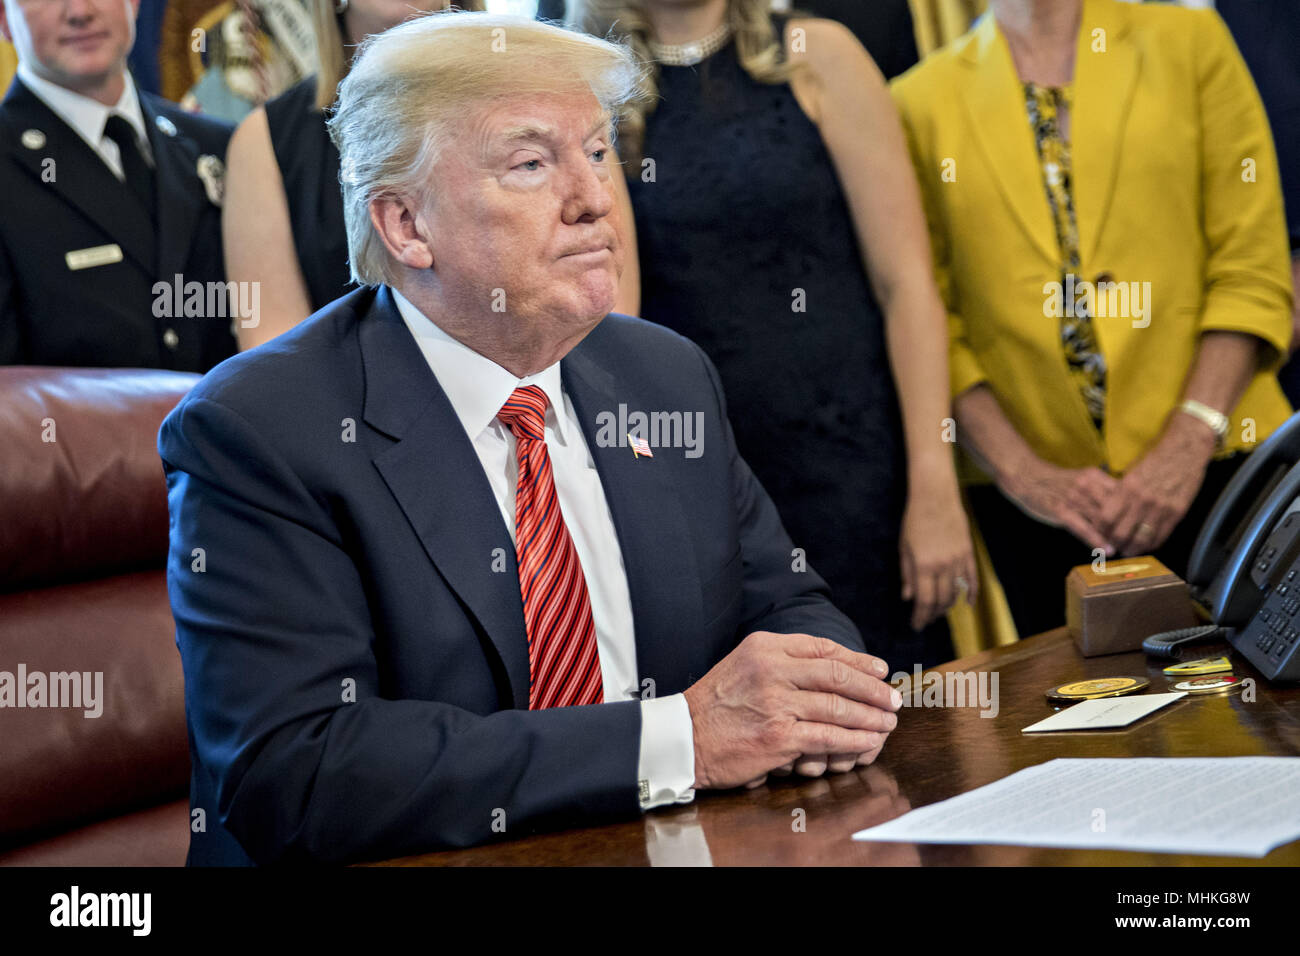 Washington, DC, USA. 1st May, 2018. United States President Donald Trump pauses after speaking while meeting with the crew and passengers of Southwest Airlines Co. flight 1380 in the Oval Office of the White House in Washington, DC, U.S., on Tuesday, May 1, 2018. An engine on Southwest's flight 1380, a Boeing Co. 737-700 bound for Dallas from New York's LaGuardia airport, exploded and made an emergency landing on April 17 sending shrapnel into the plane and killing a passenger seated near a window. Credit: Andrew Harrer/Pool via CNP | usage worldwide Credit: dpa/Alamy Live News Stock Photo